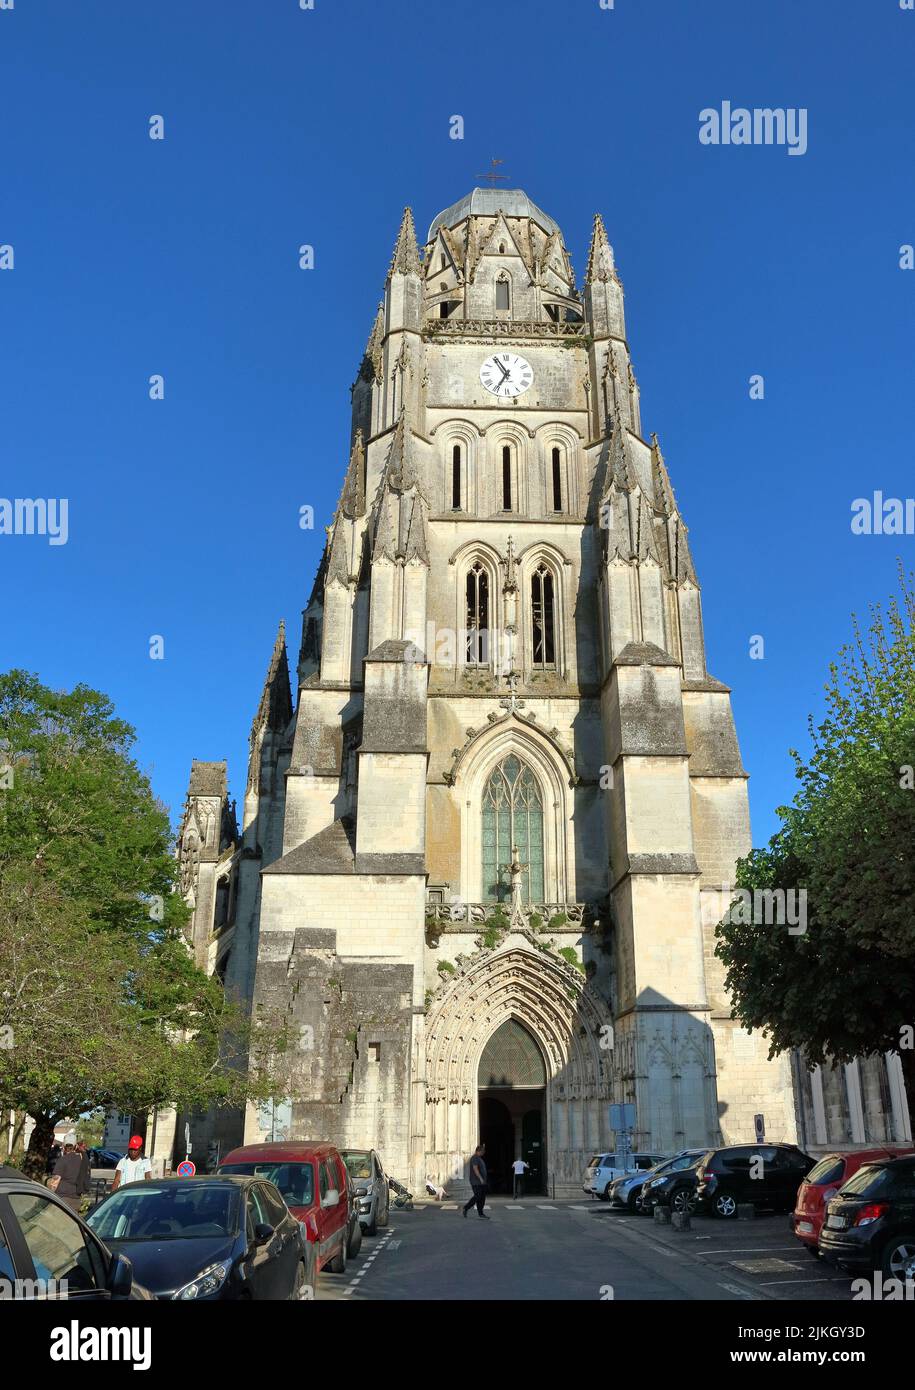 Tower of the romanesque, partly gothic Saint Pierre cathedral, constructed between 12th and 15th centuries, in Saintes, Charente-Maritime, France Stock Photo